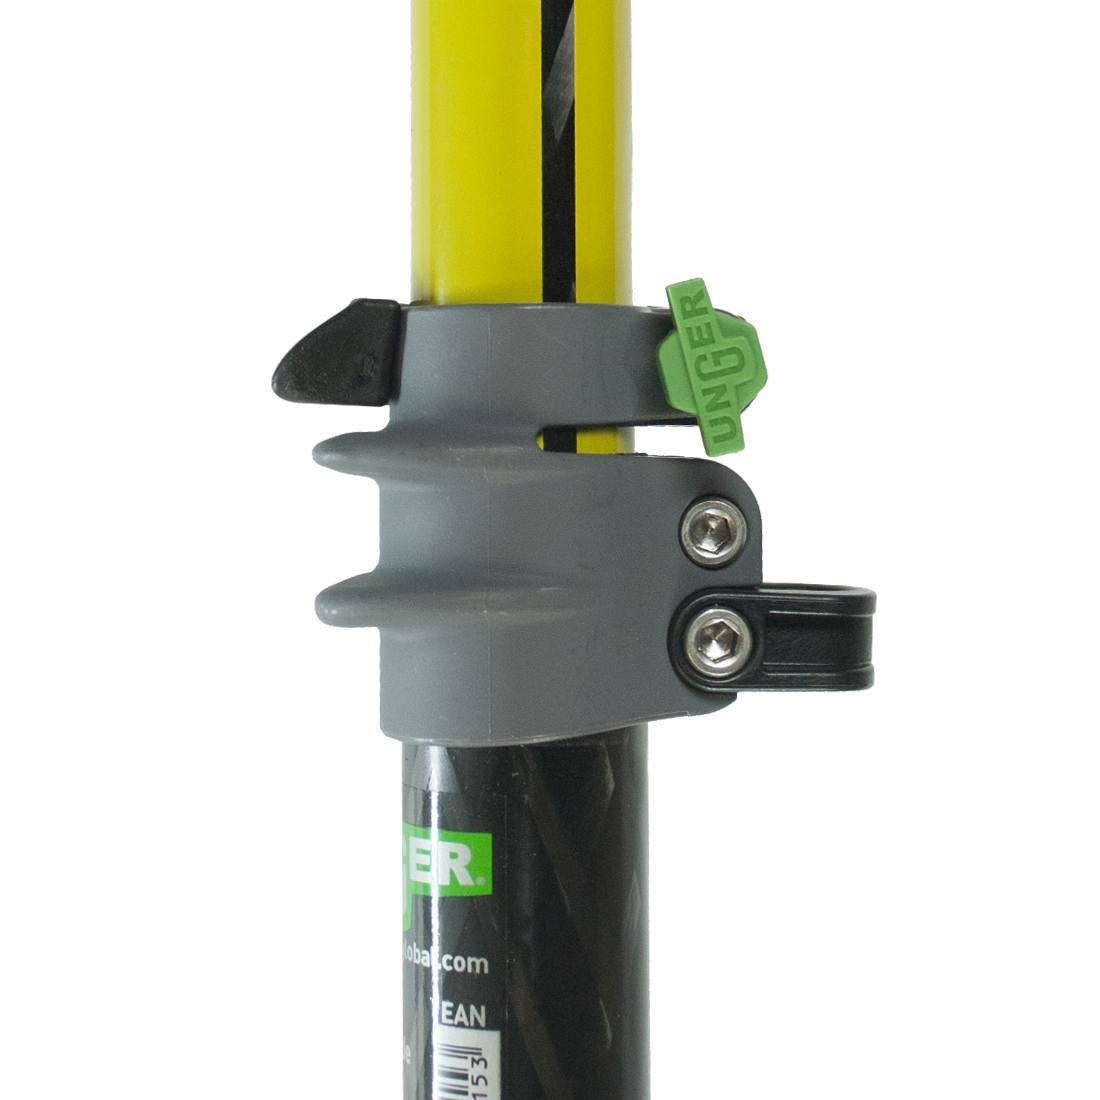 Unger nLite HiMod Carbon Extension Pole - 11 Foot - Clamp with Yellow Pole View